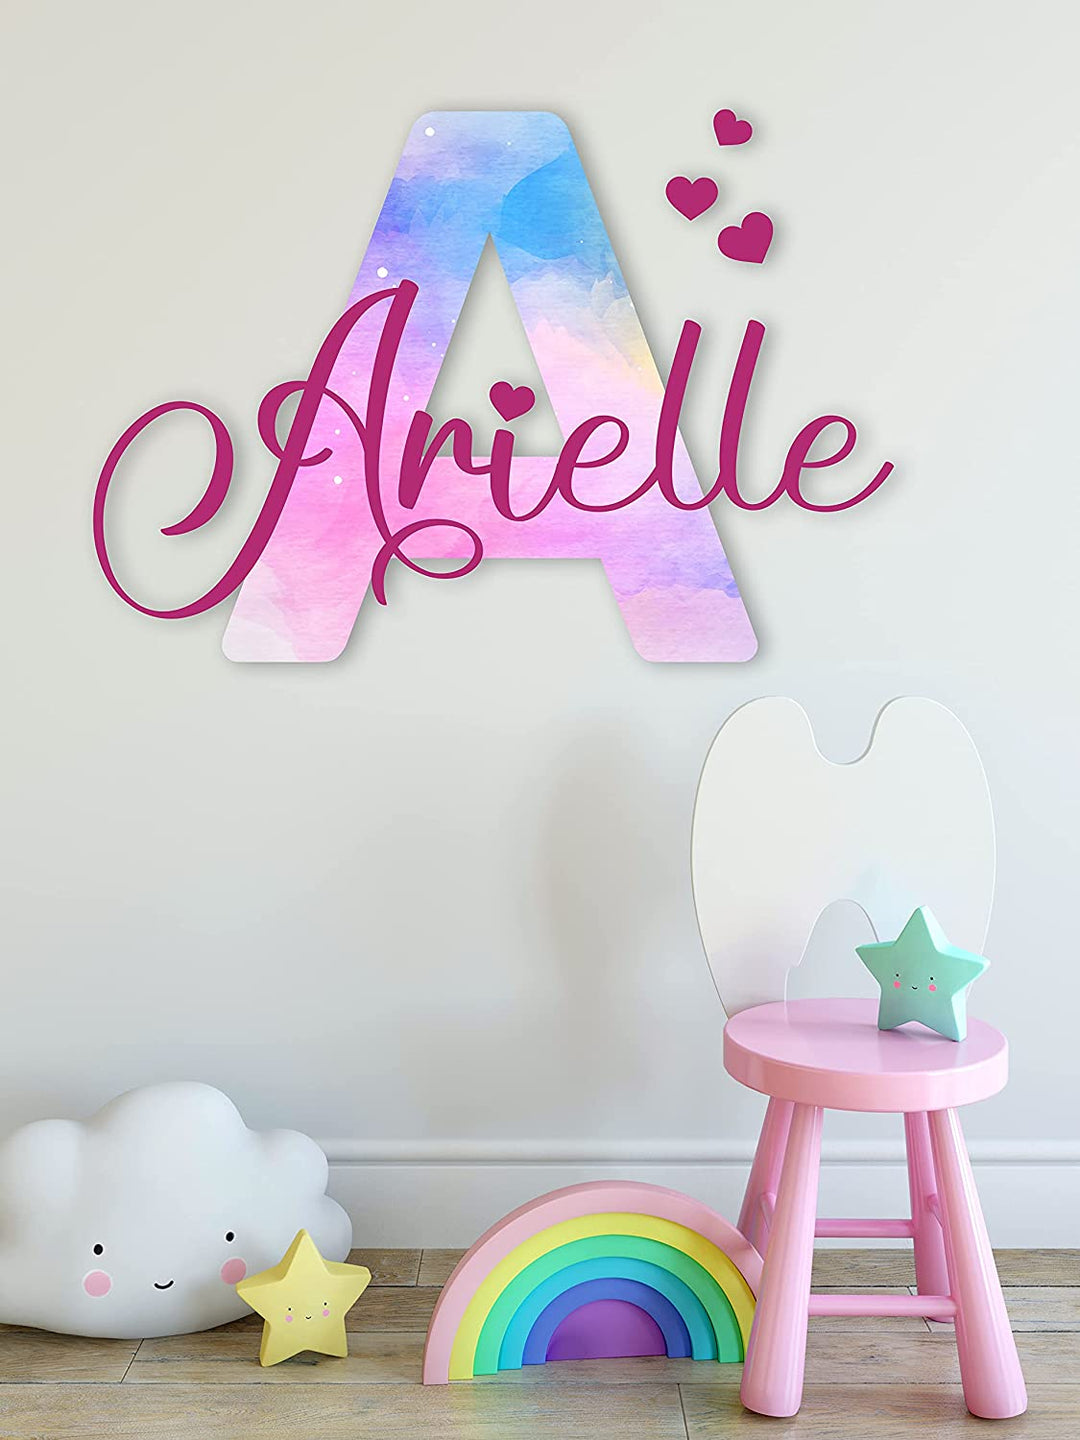 Shimmer Colors Printed Custom Name, Initial and Hearts - Wall Stickers - Baby Girl - Nursery Wall Decal for Baby Room Decorations - Mural Wall Decal Sticker for Home Children's Bedroom GM010 - egraphicstore